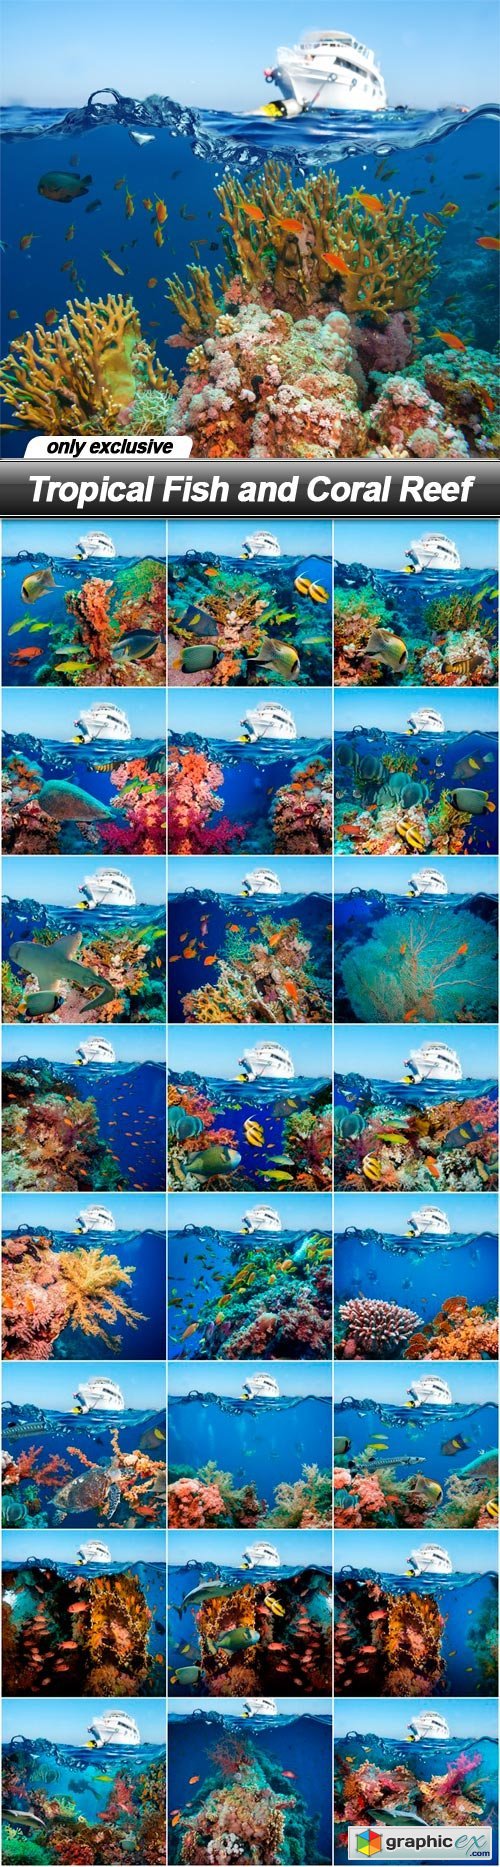 Tropical Fish and Coral Reef - 25 UHQ JPEG